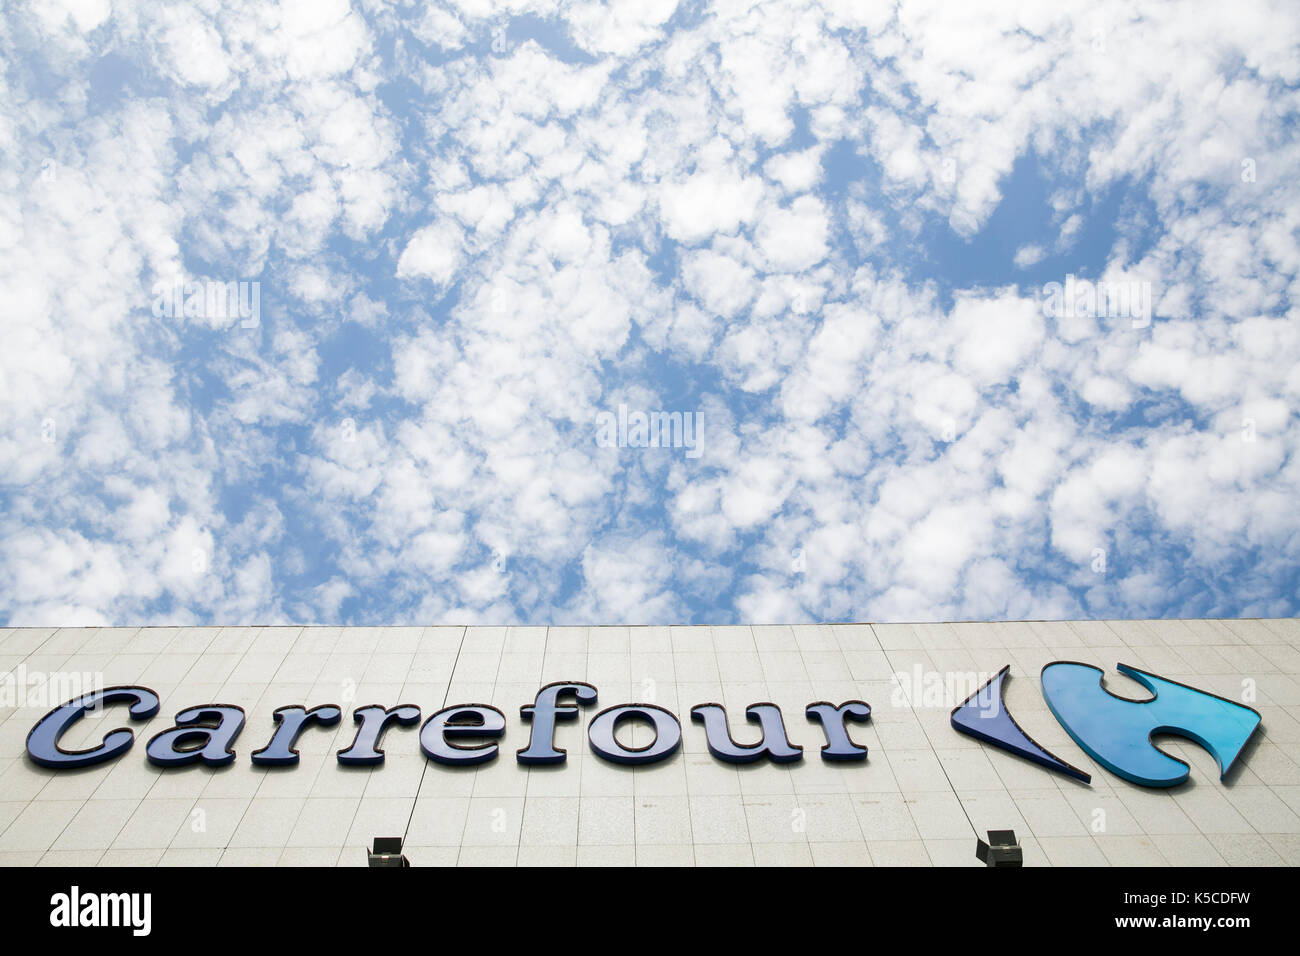 A logo sign outside of a Carrefour retail store in Barcelona, Spain on August 30, 2017. Stock Photo